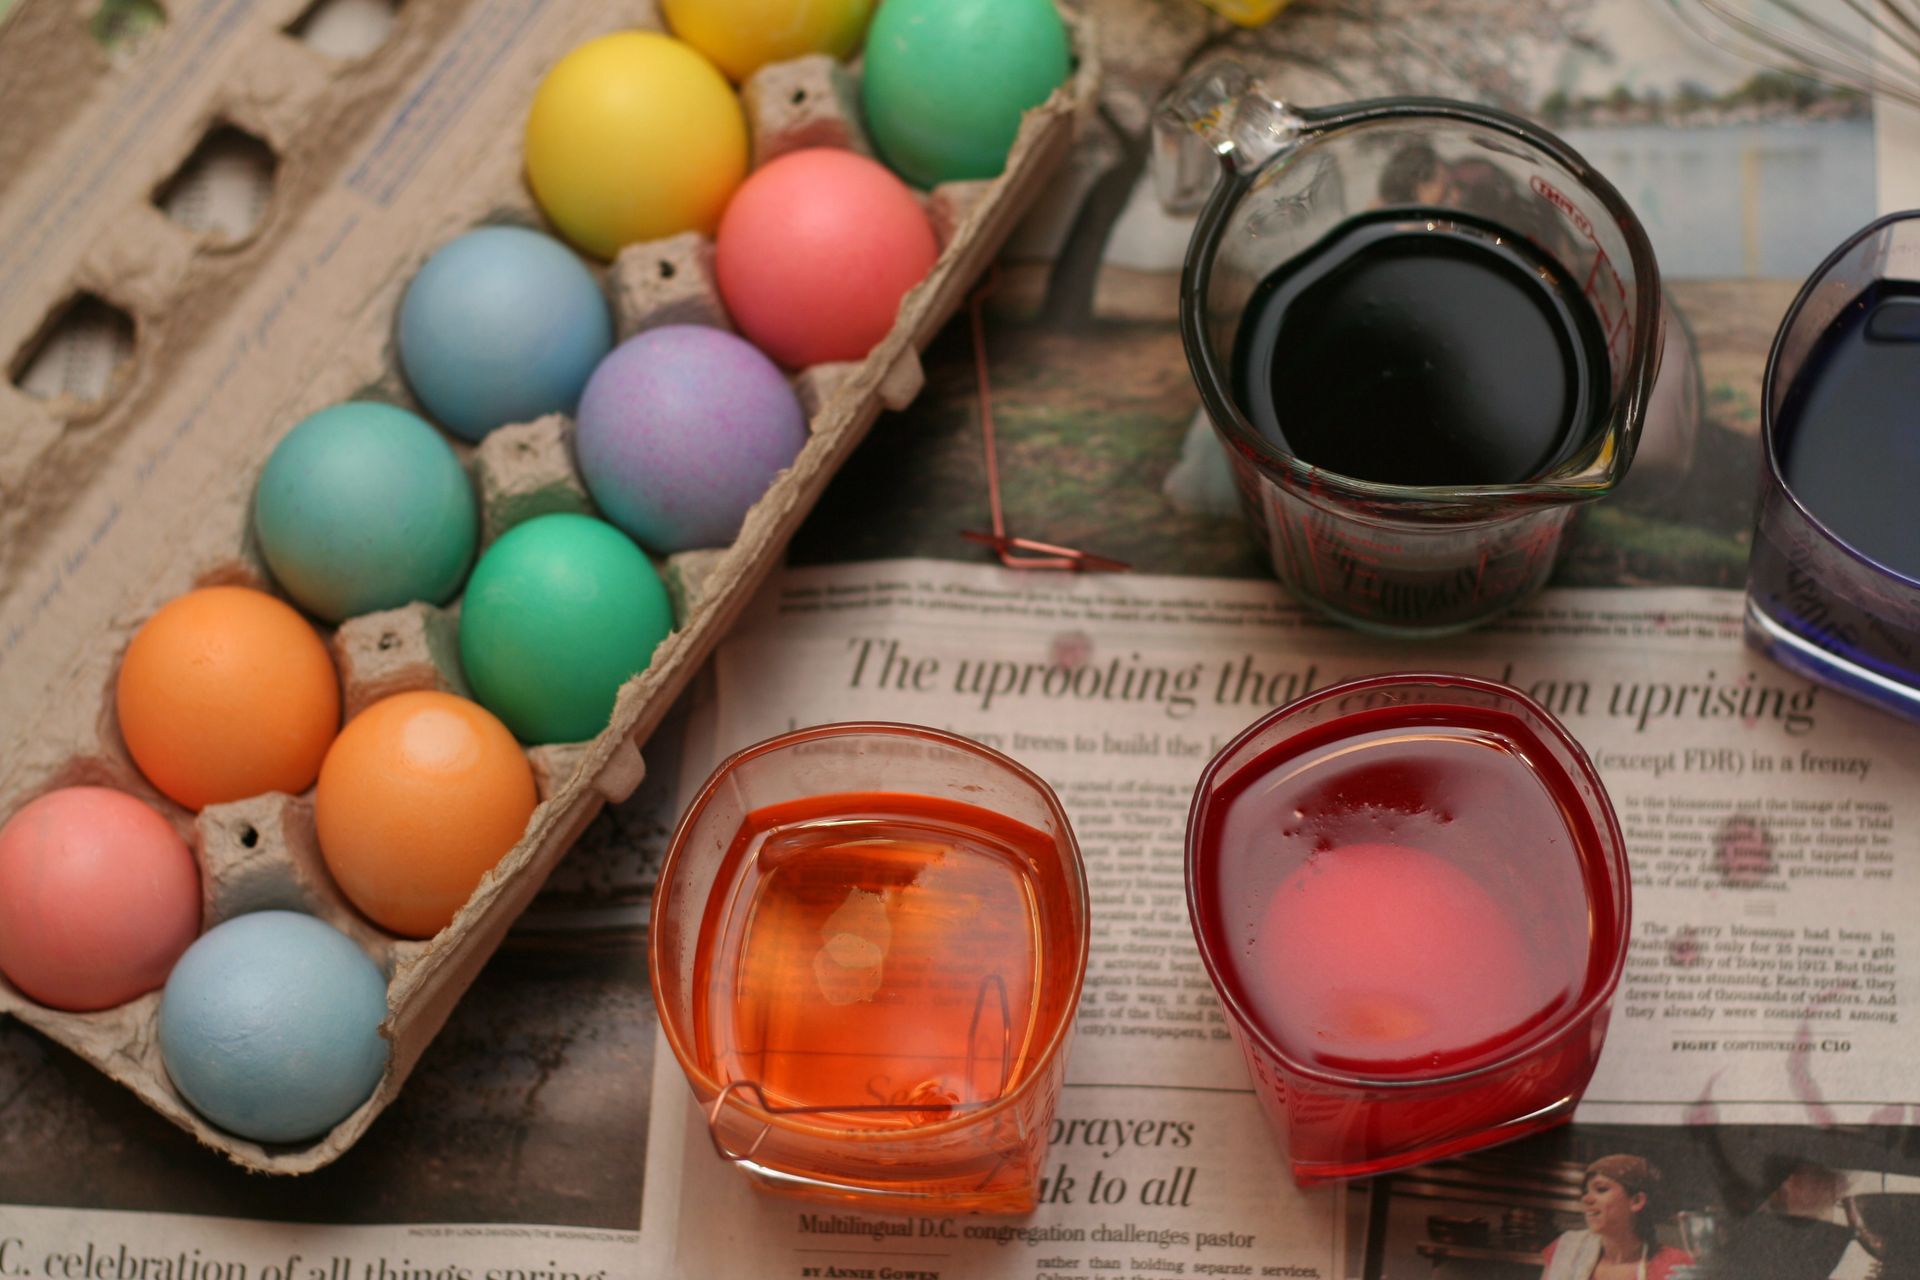 Several cups of Easter egg dye near a carton of newly colored eggs.